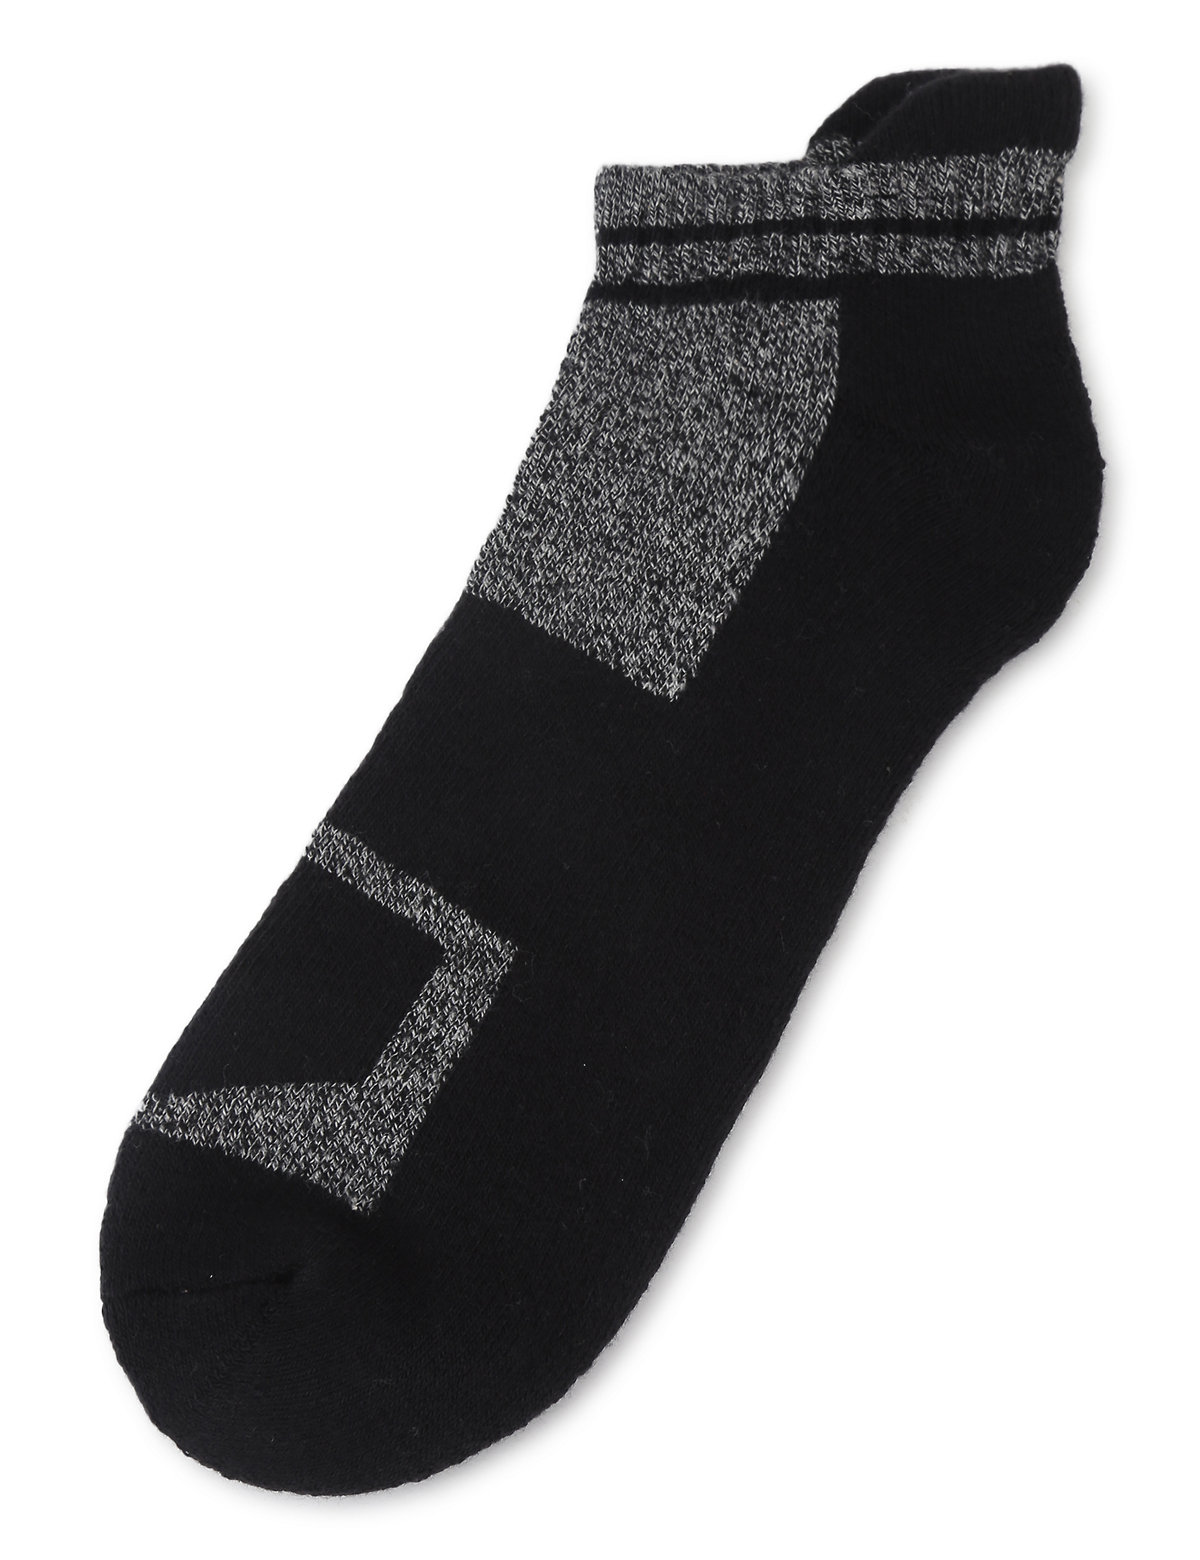 Pack of 3 Pair Cotton Mix Ankle Socks